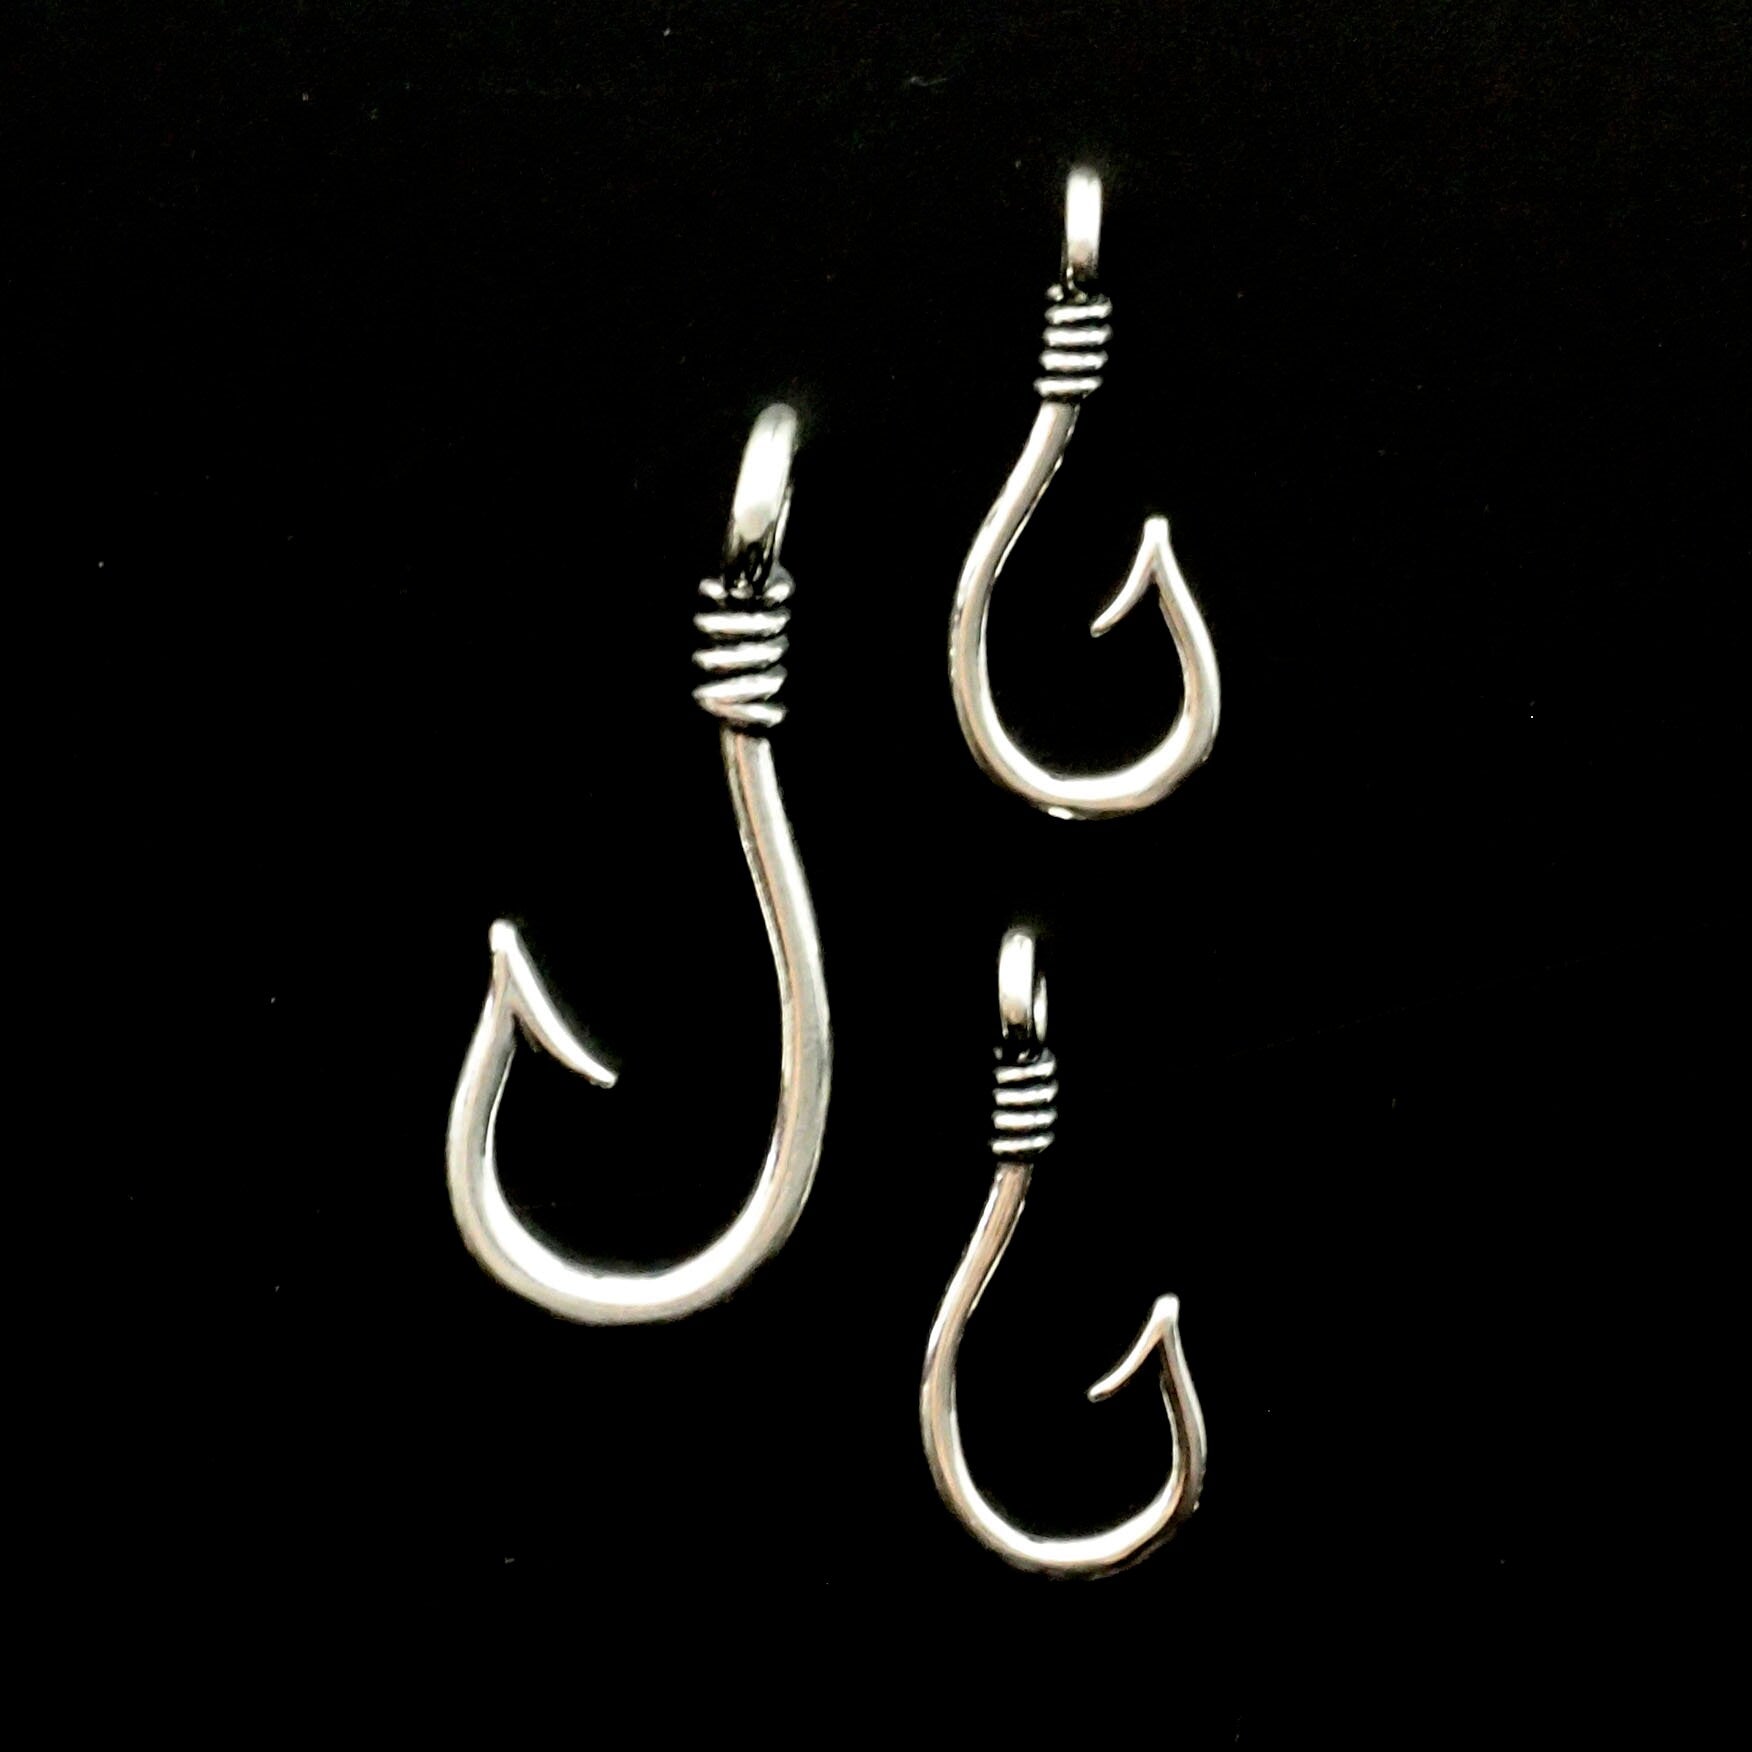 2 Fish Hook Clasps, Charms or Pendants in Sterling Silver - Made